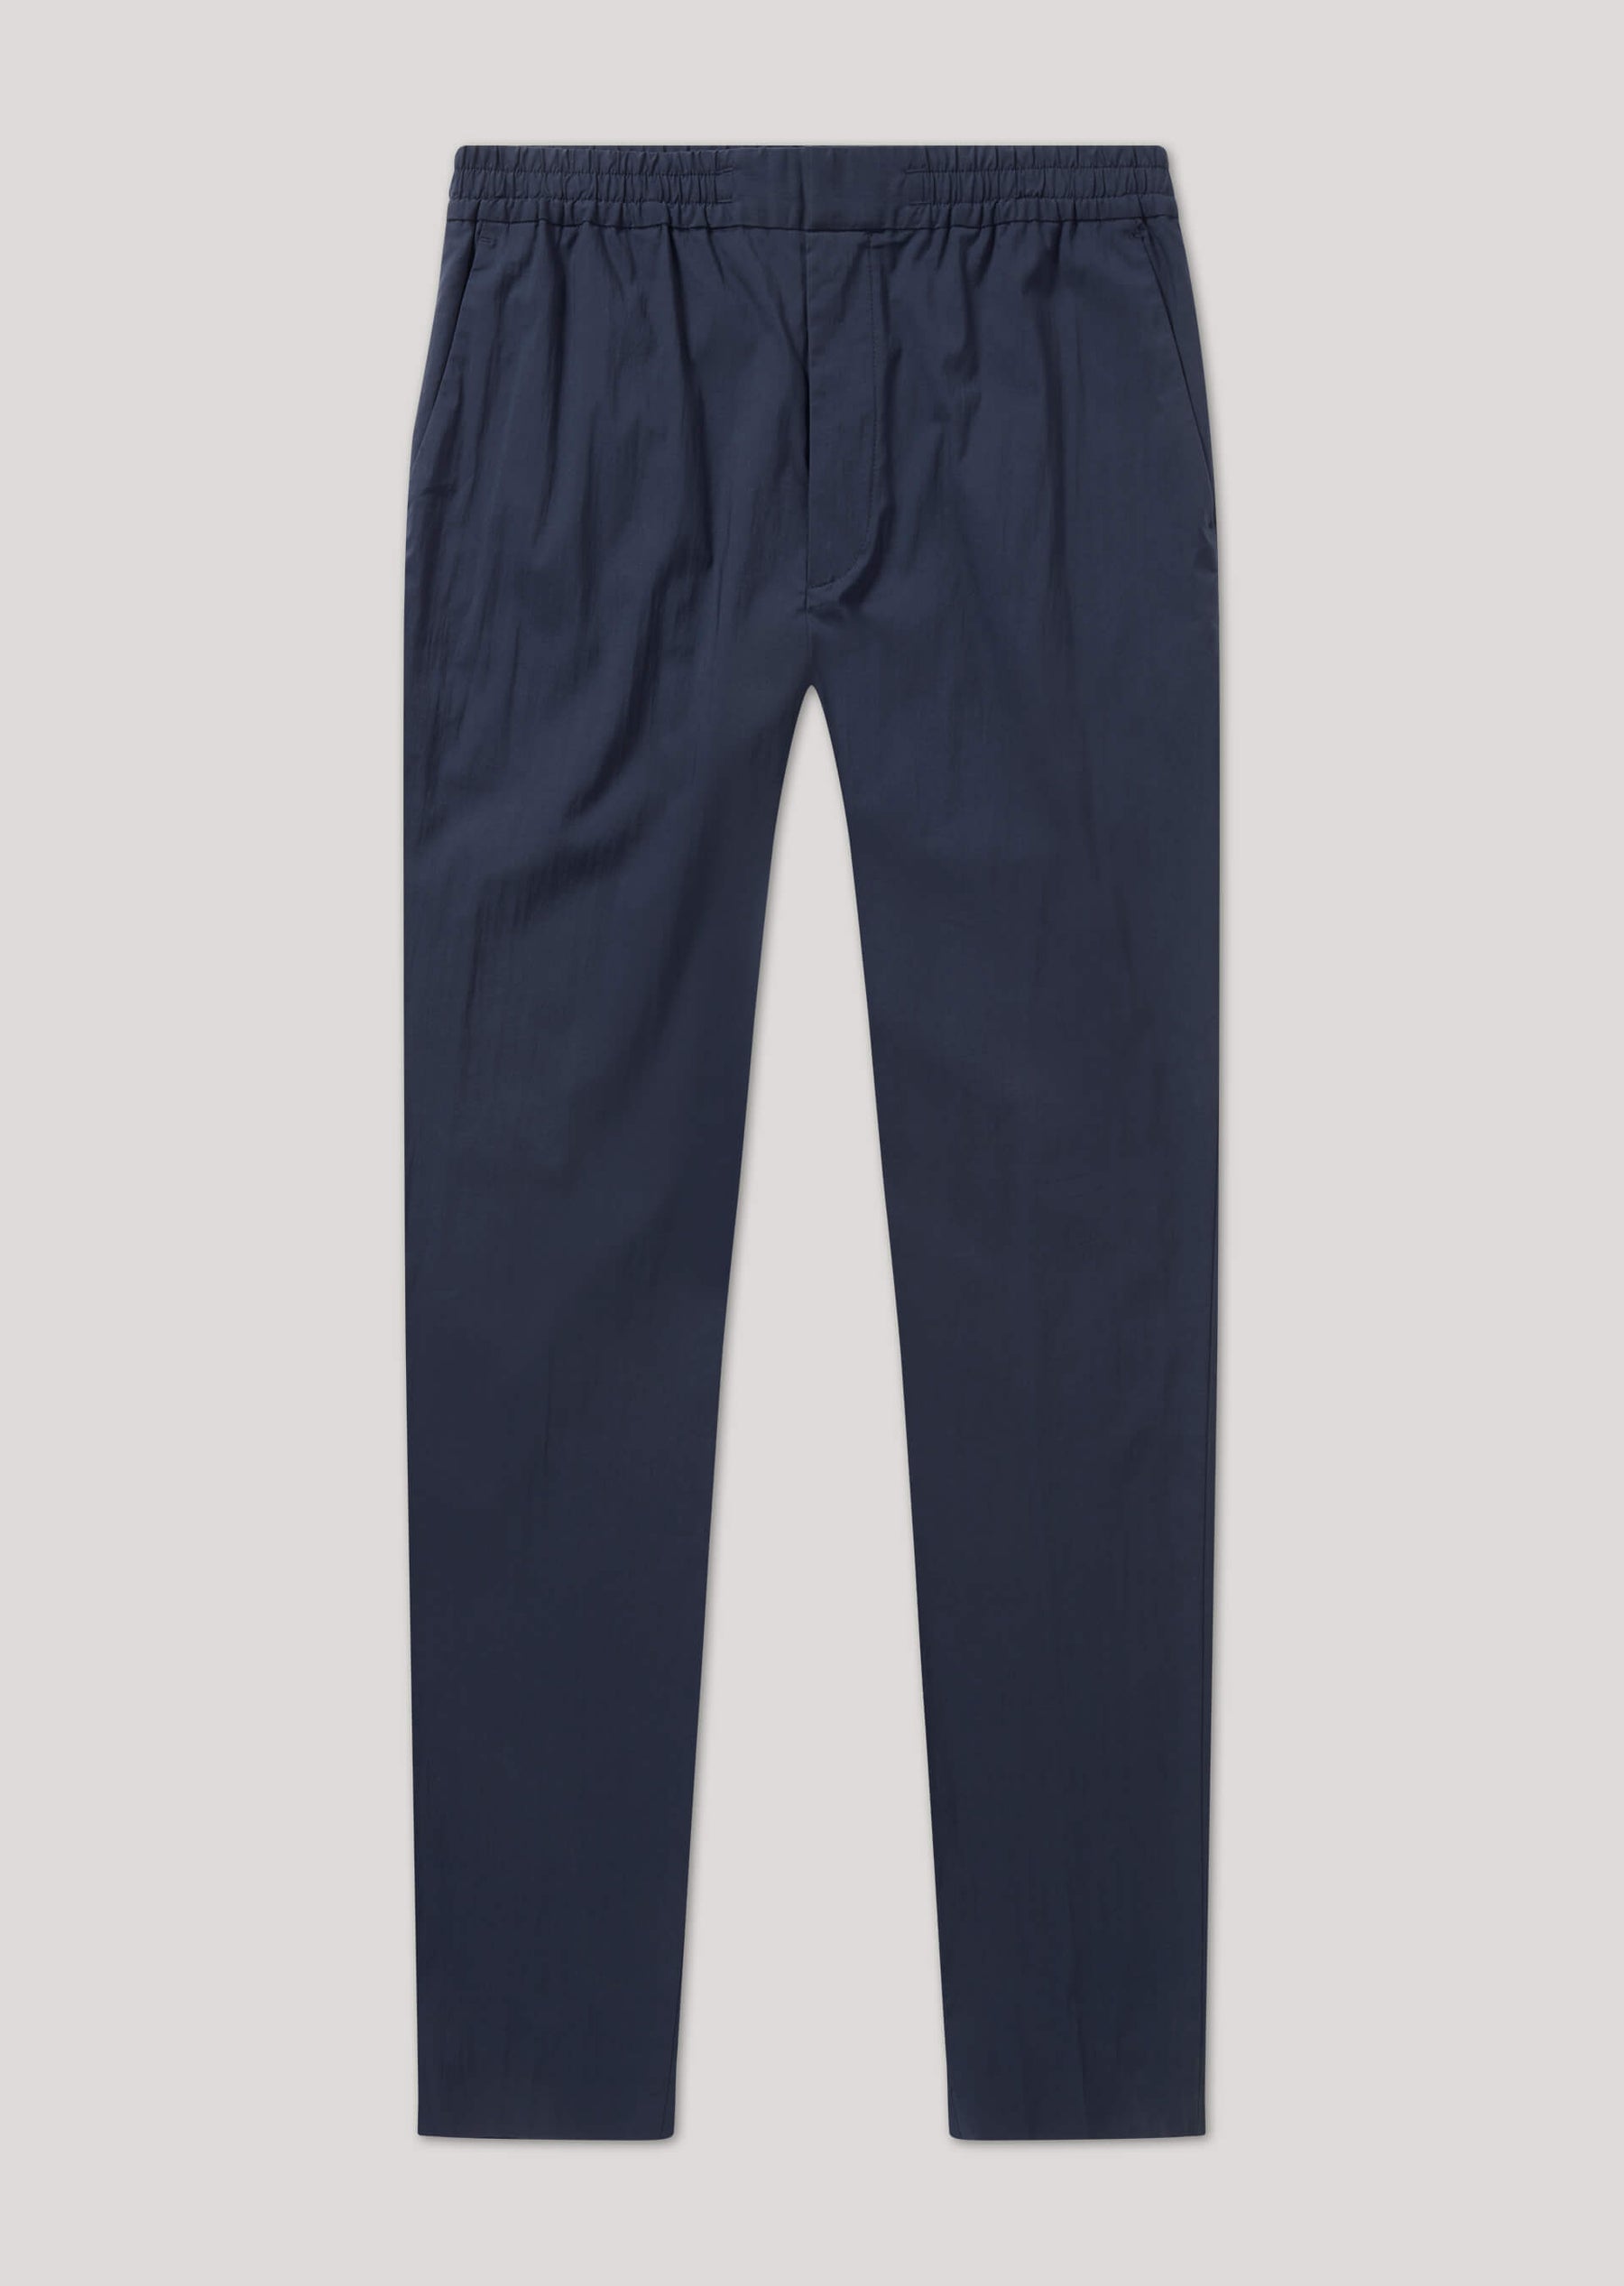 Hackforth Navy Stretch Formal Trousers